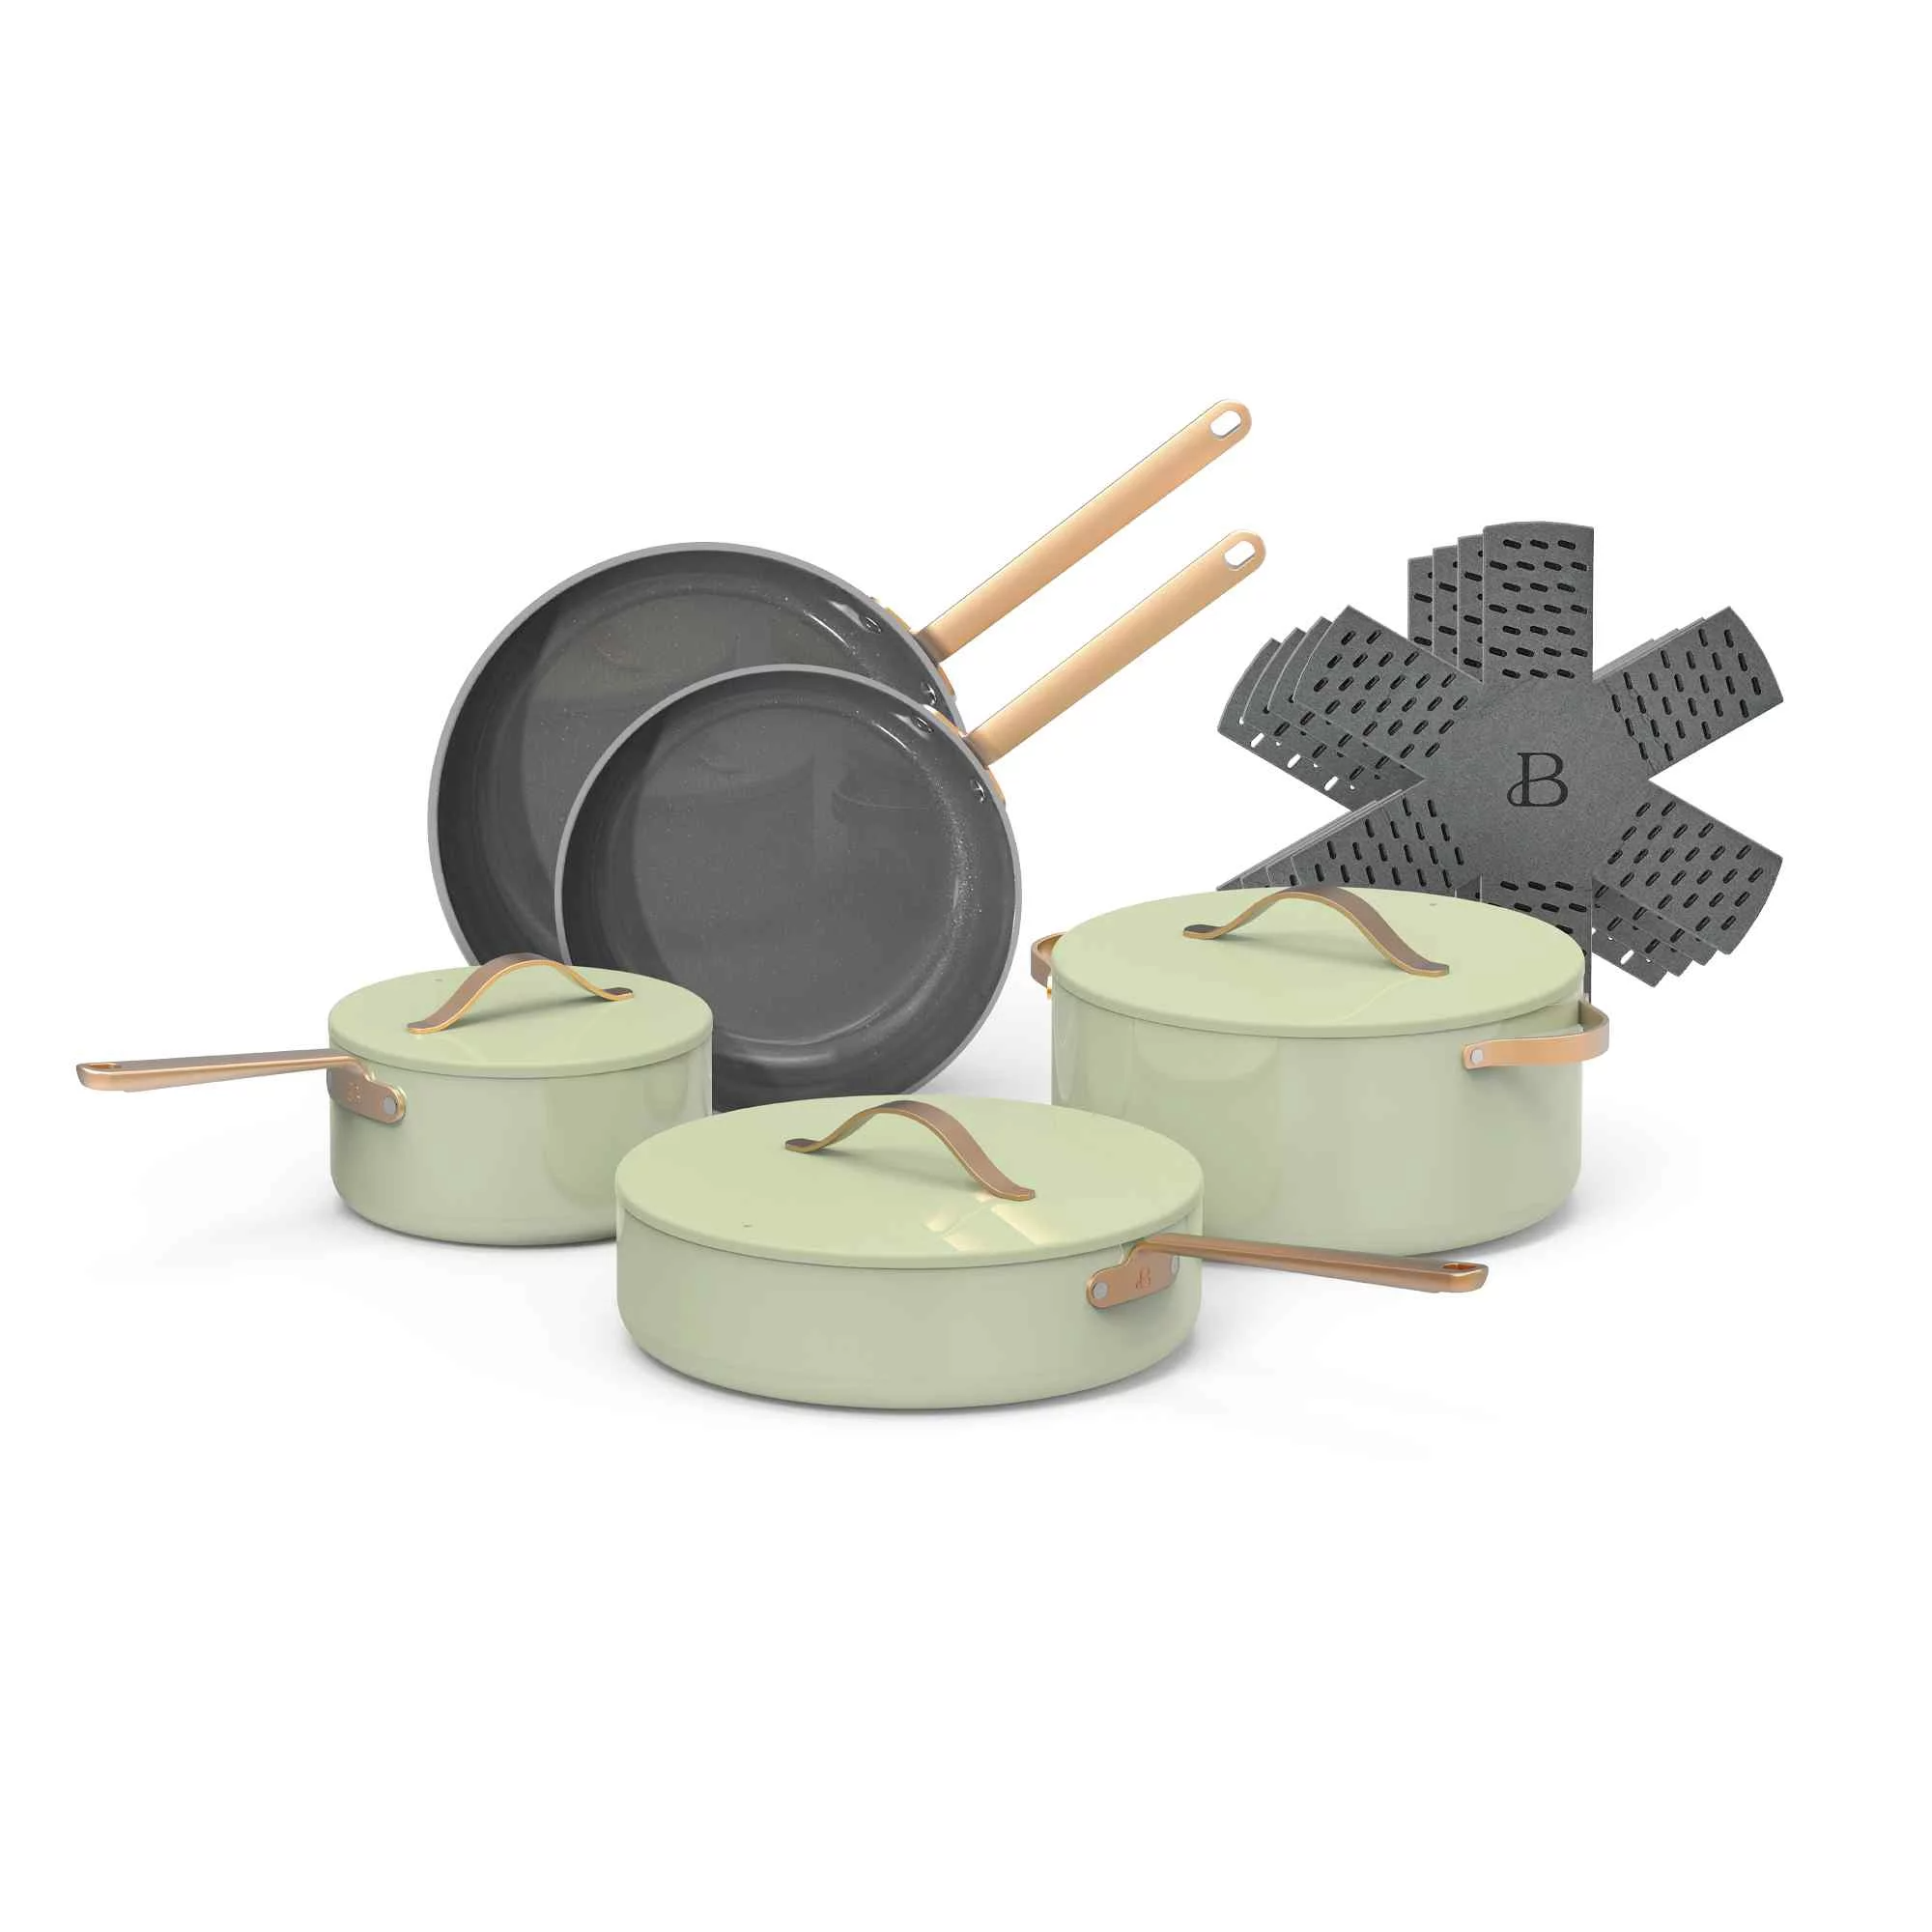 This Viral TikTok Pan Set Is Over 50% Off on Black Friday - CNET